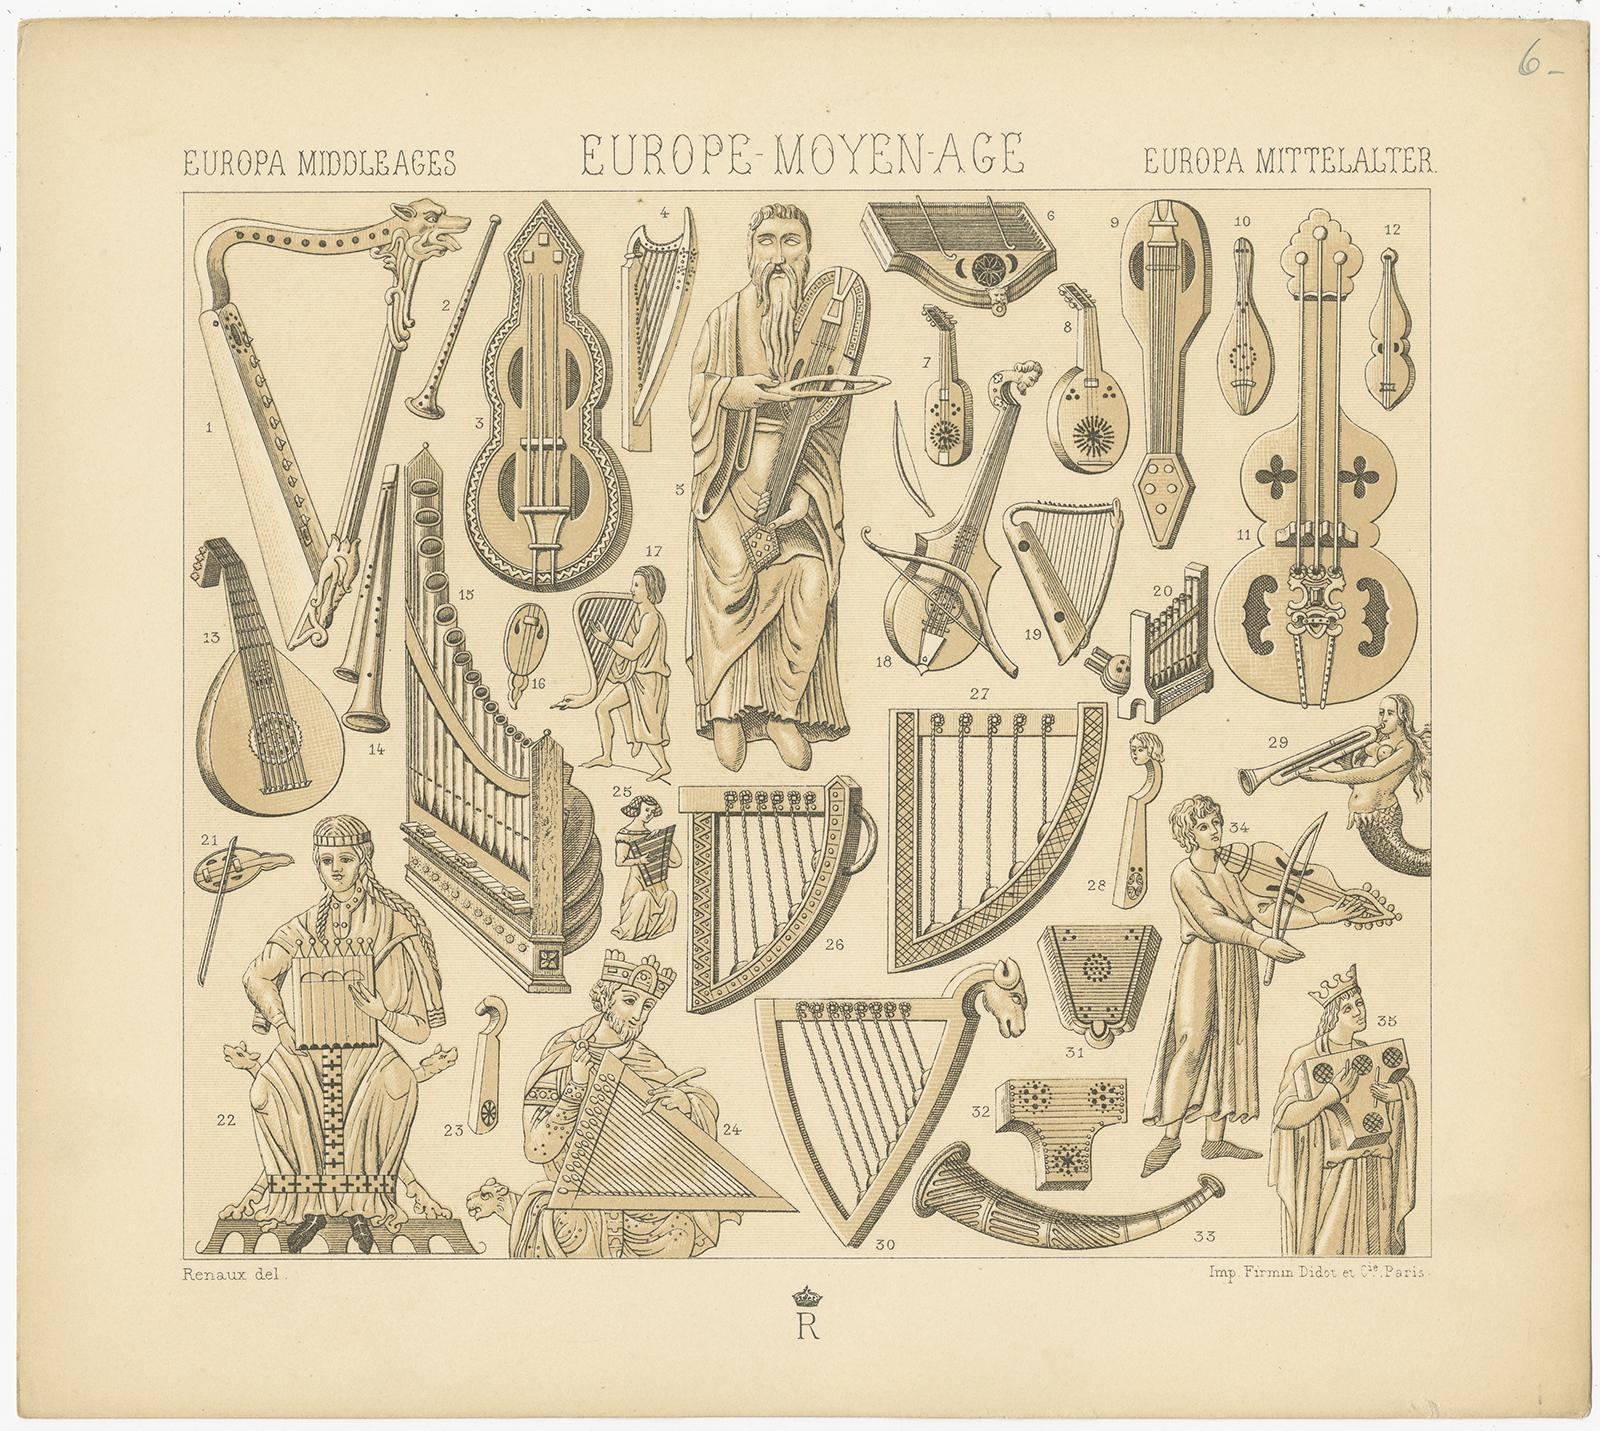 Antique print titled 'Europa Middle Ages - Europe Moyen Age - Europa Mittelalter'. Chromolithograph of European Middle Ages Music Objects. This print originates from 'Le Costume Historique' by M.A. Racinet. Published, circa 1880.